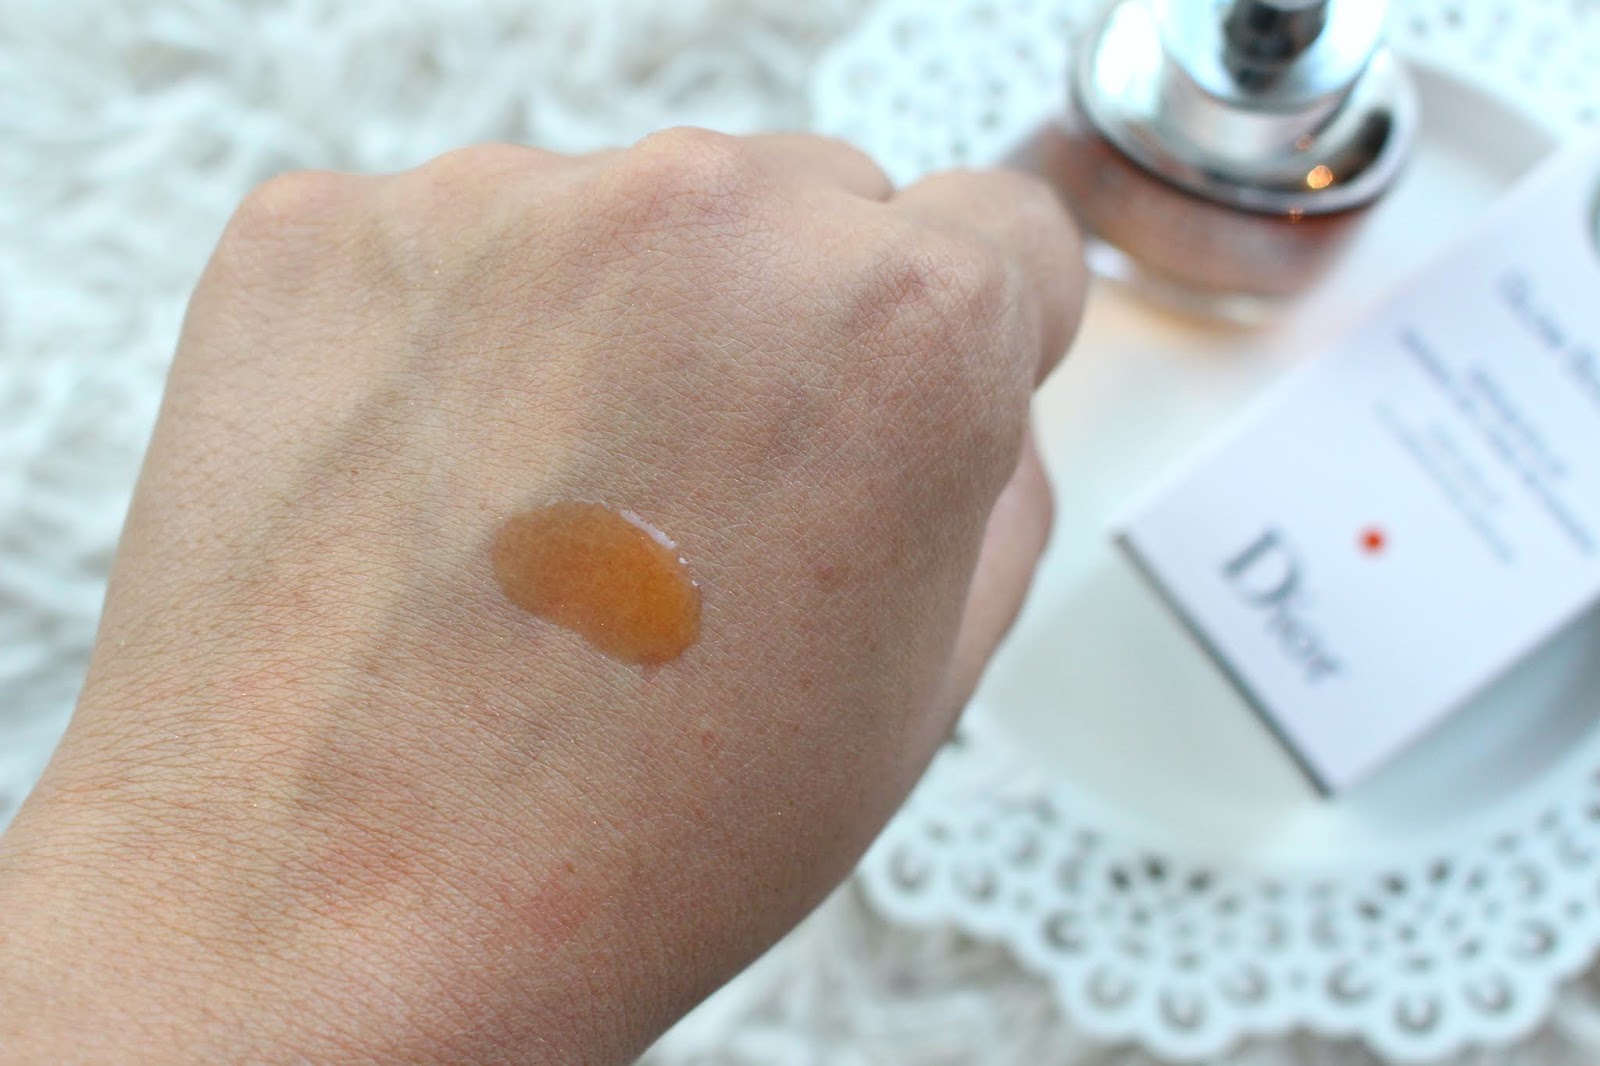 dior youth serum glow review